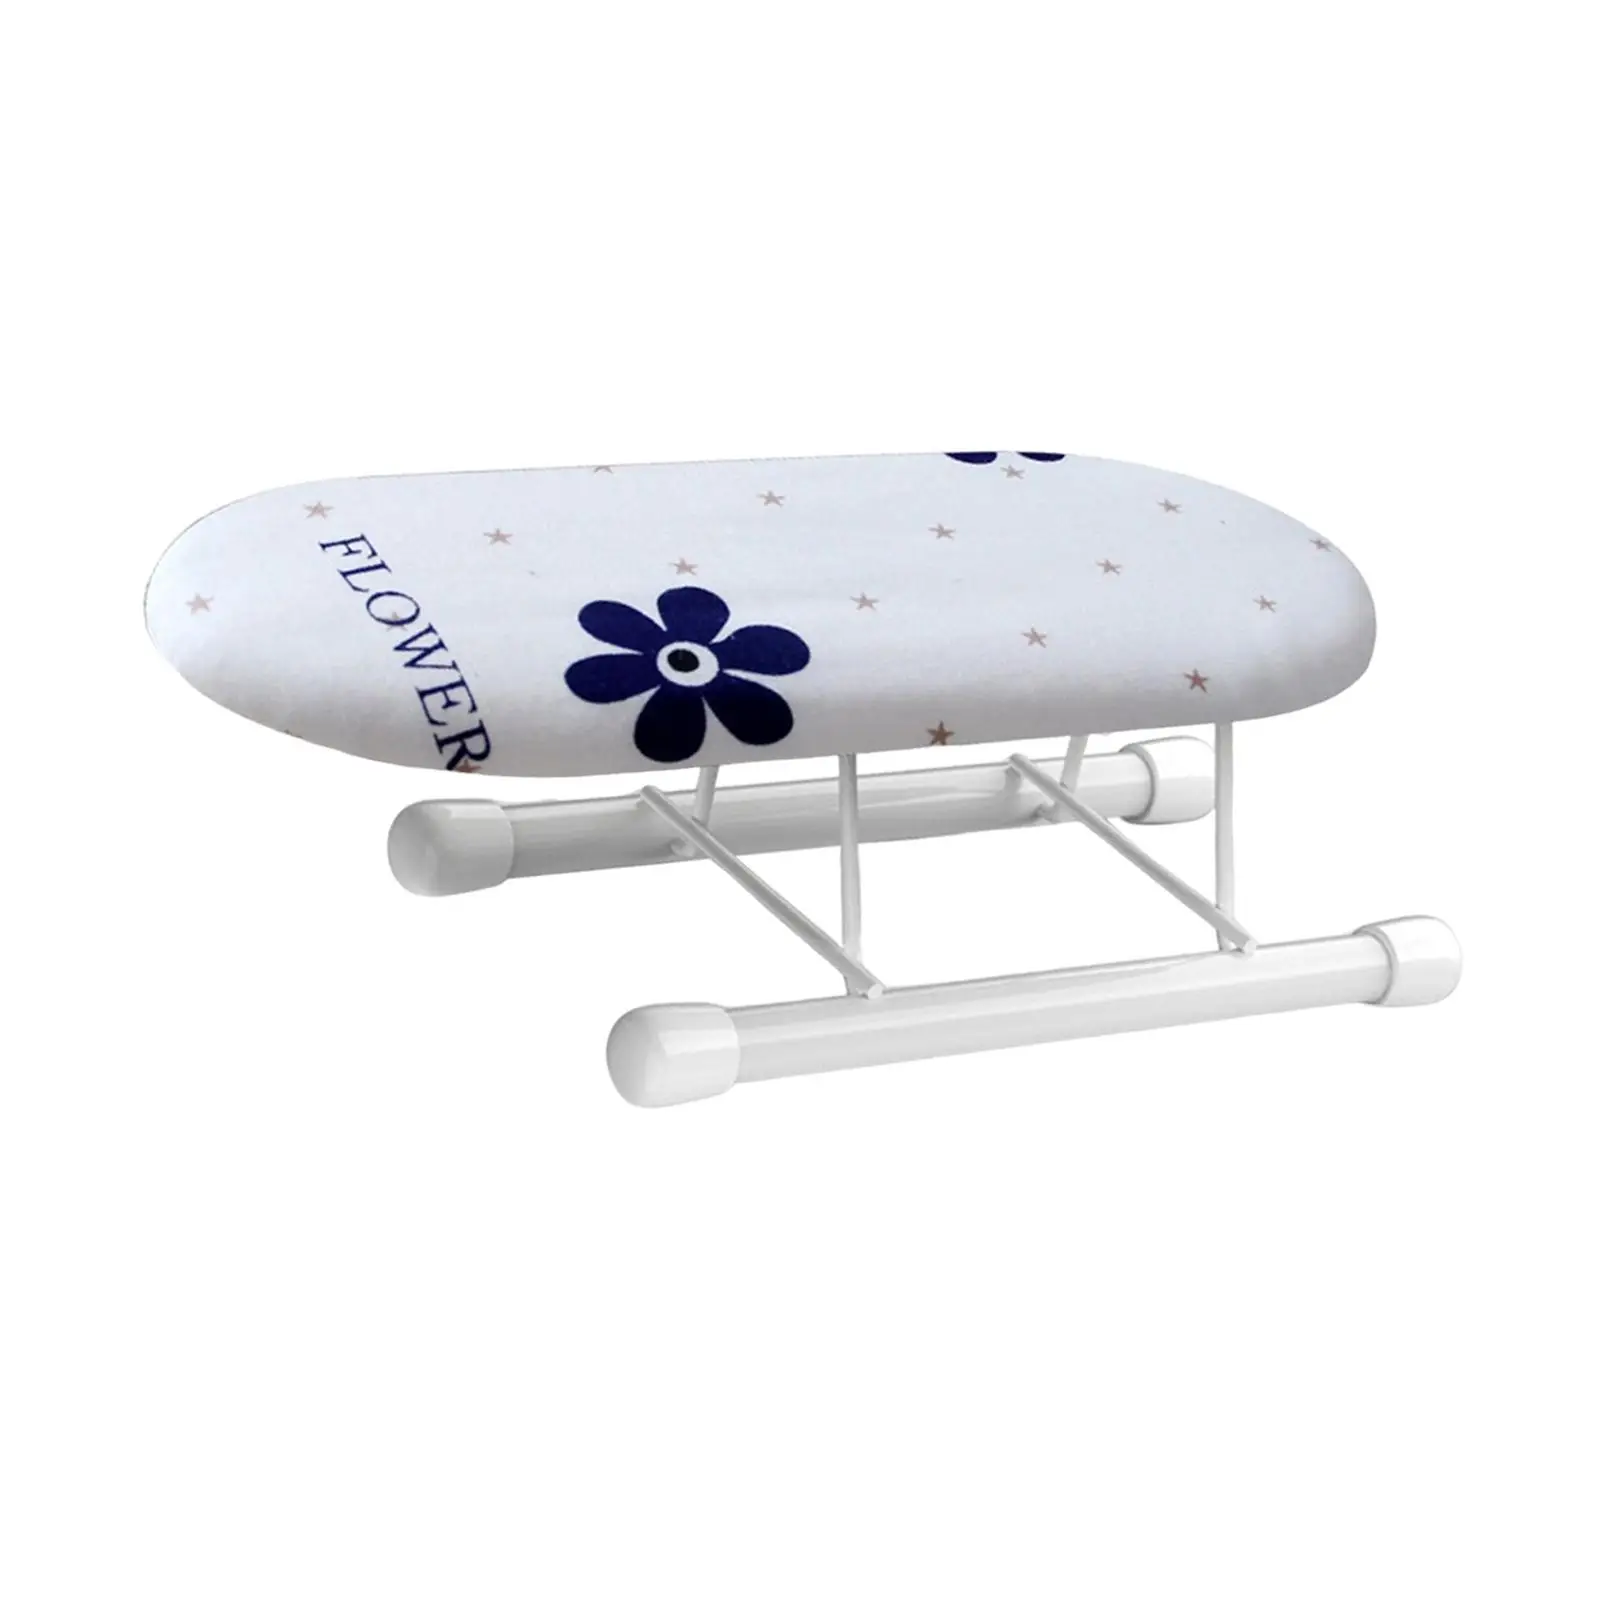 Portable Ironing Board Folding Mini Ironing Cover for Household Home Dorms Room Ironing